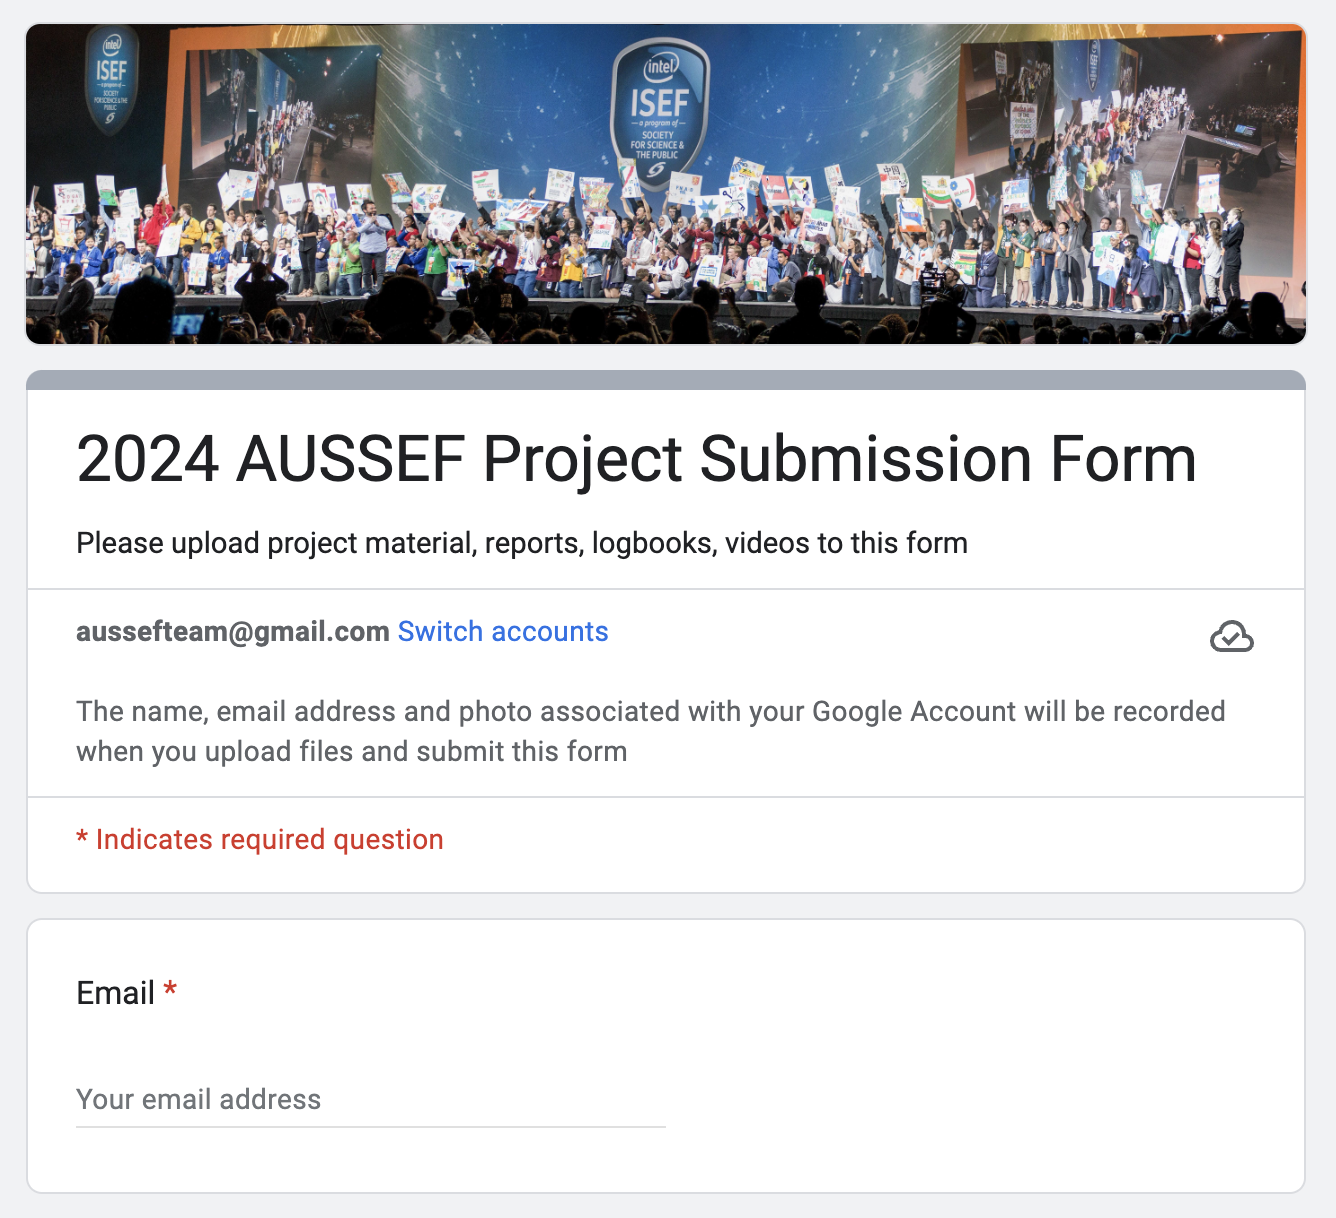 Submission Form - Click to access